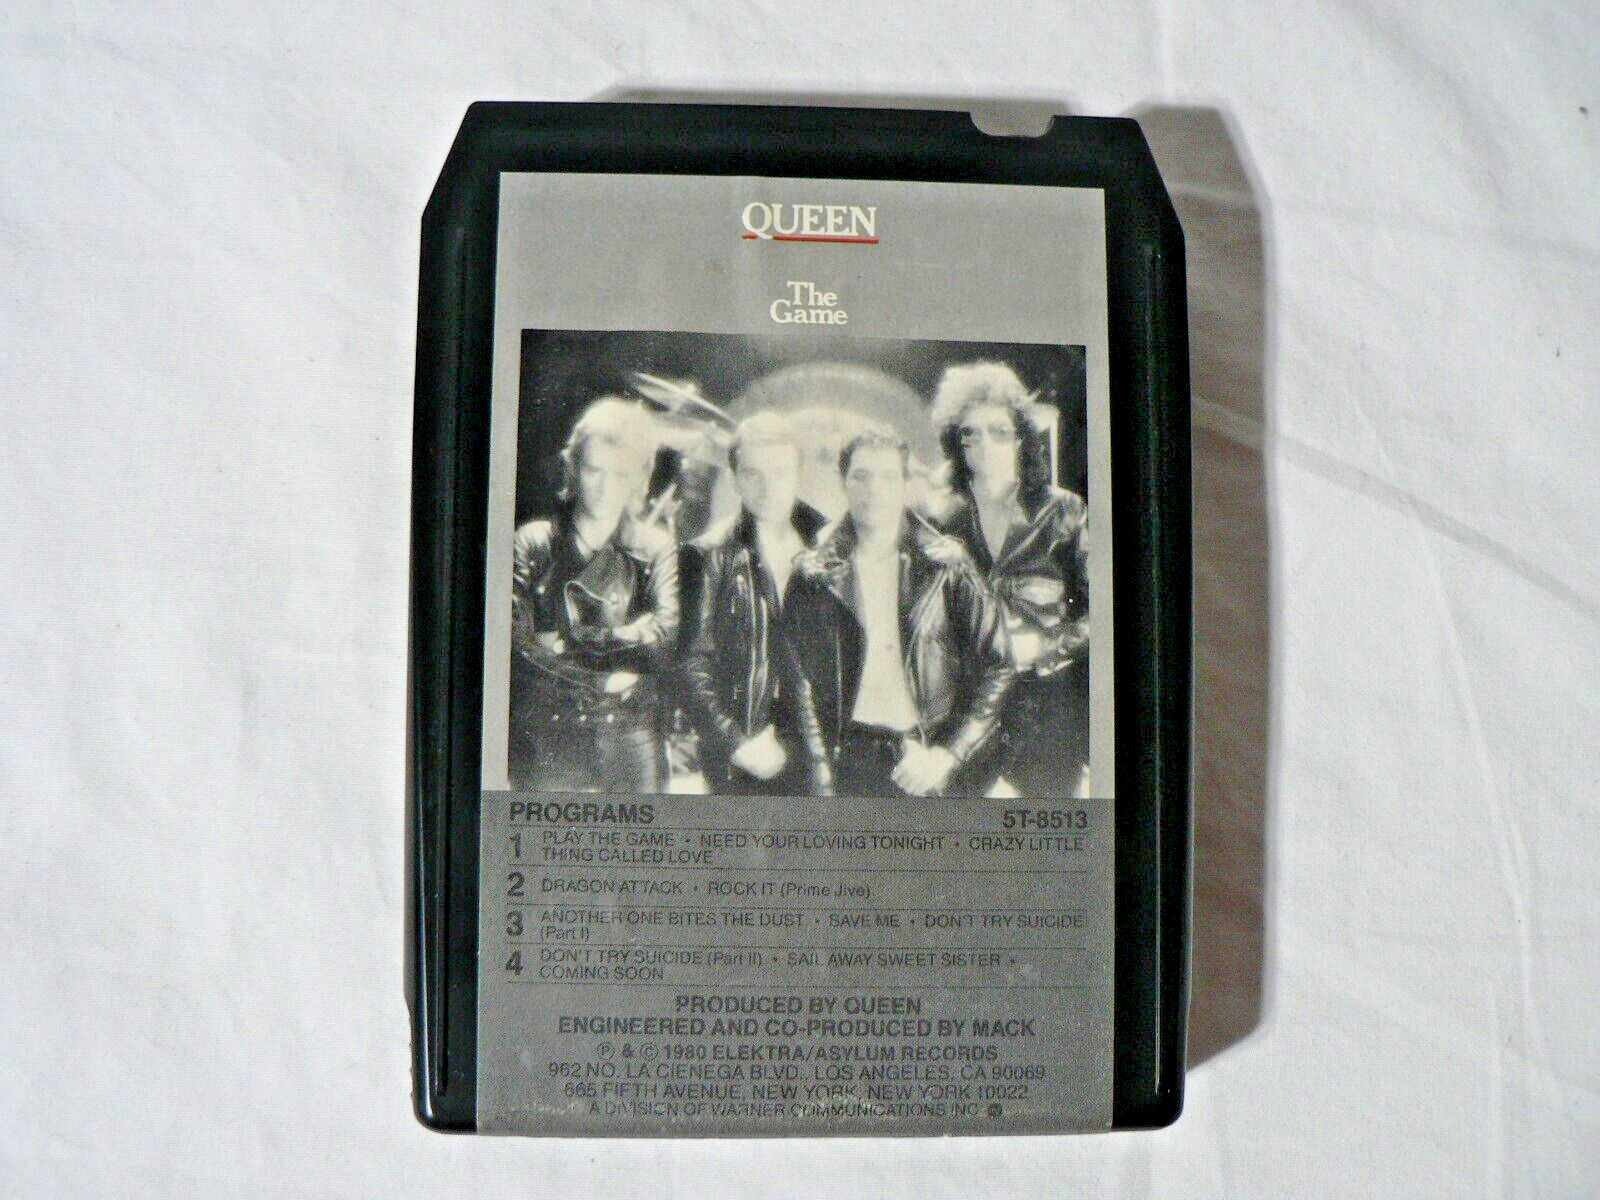 8 track tape, Queen, The Game, new splice and pad